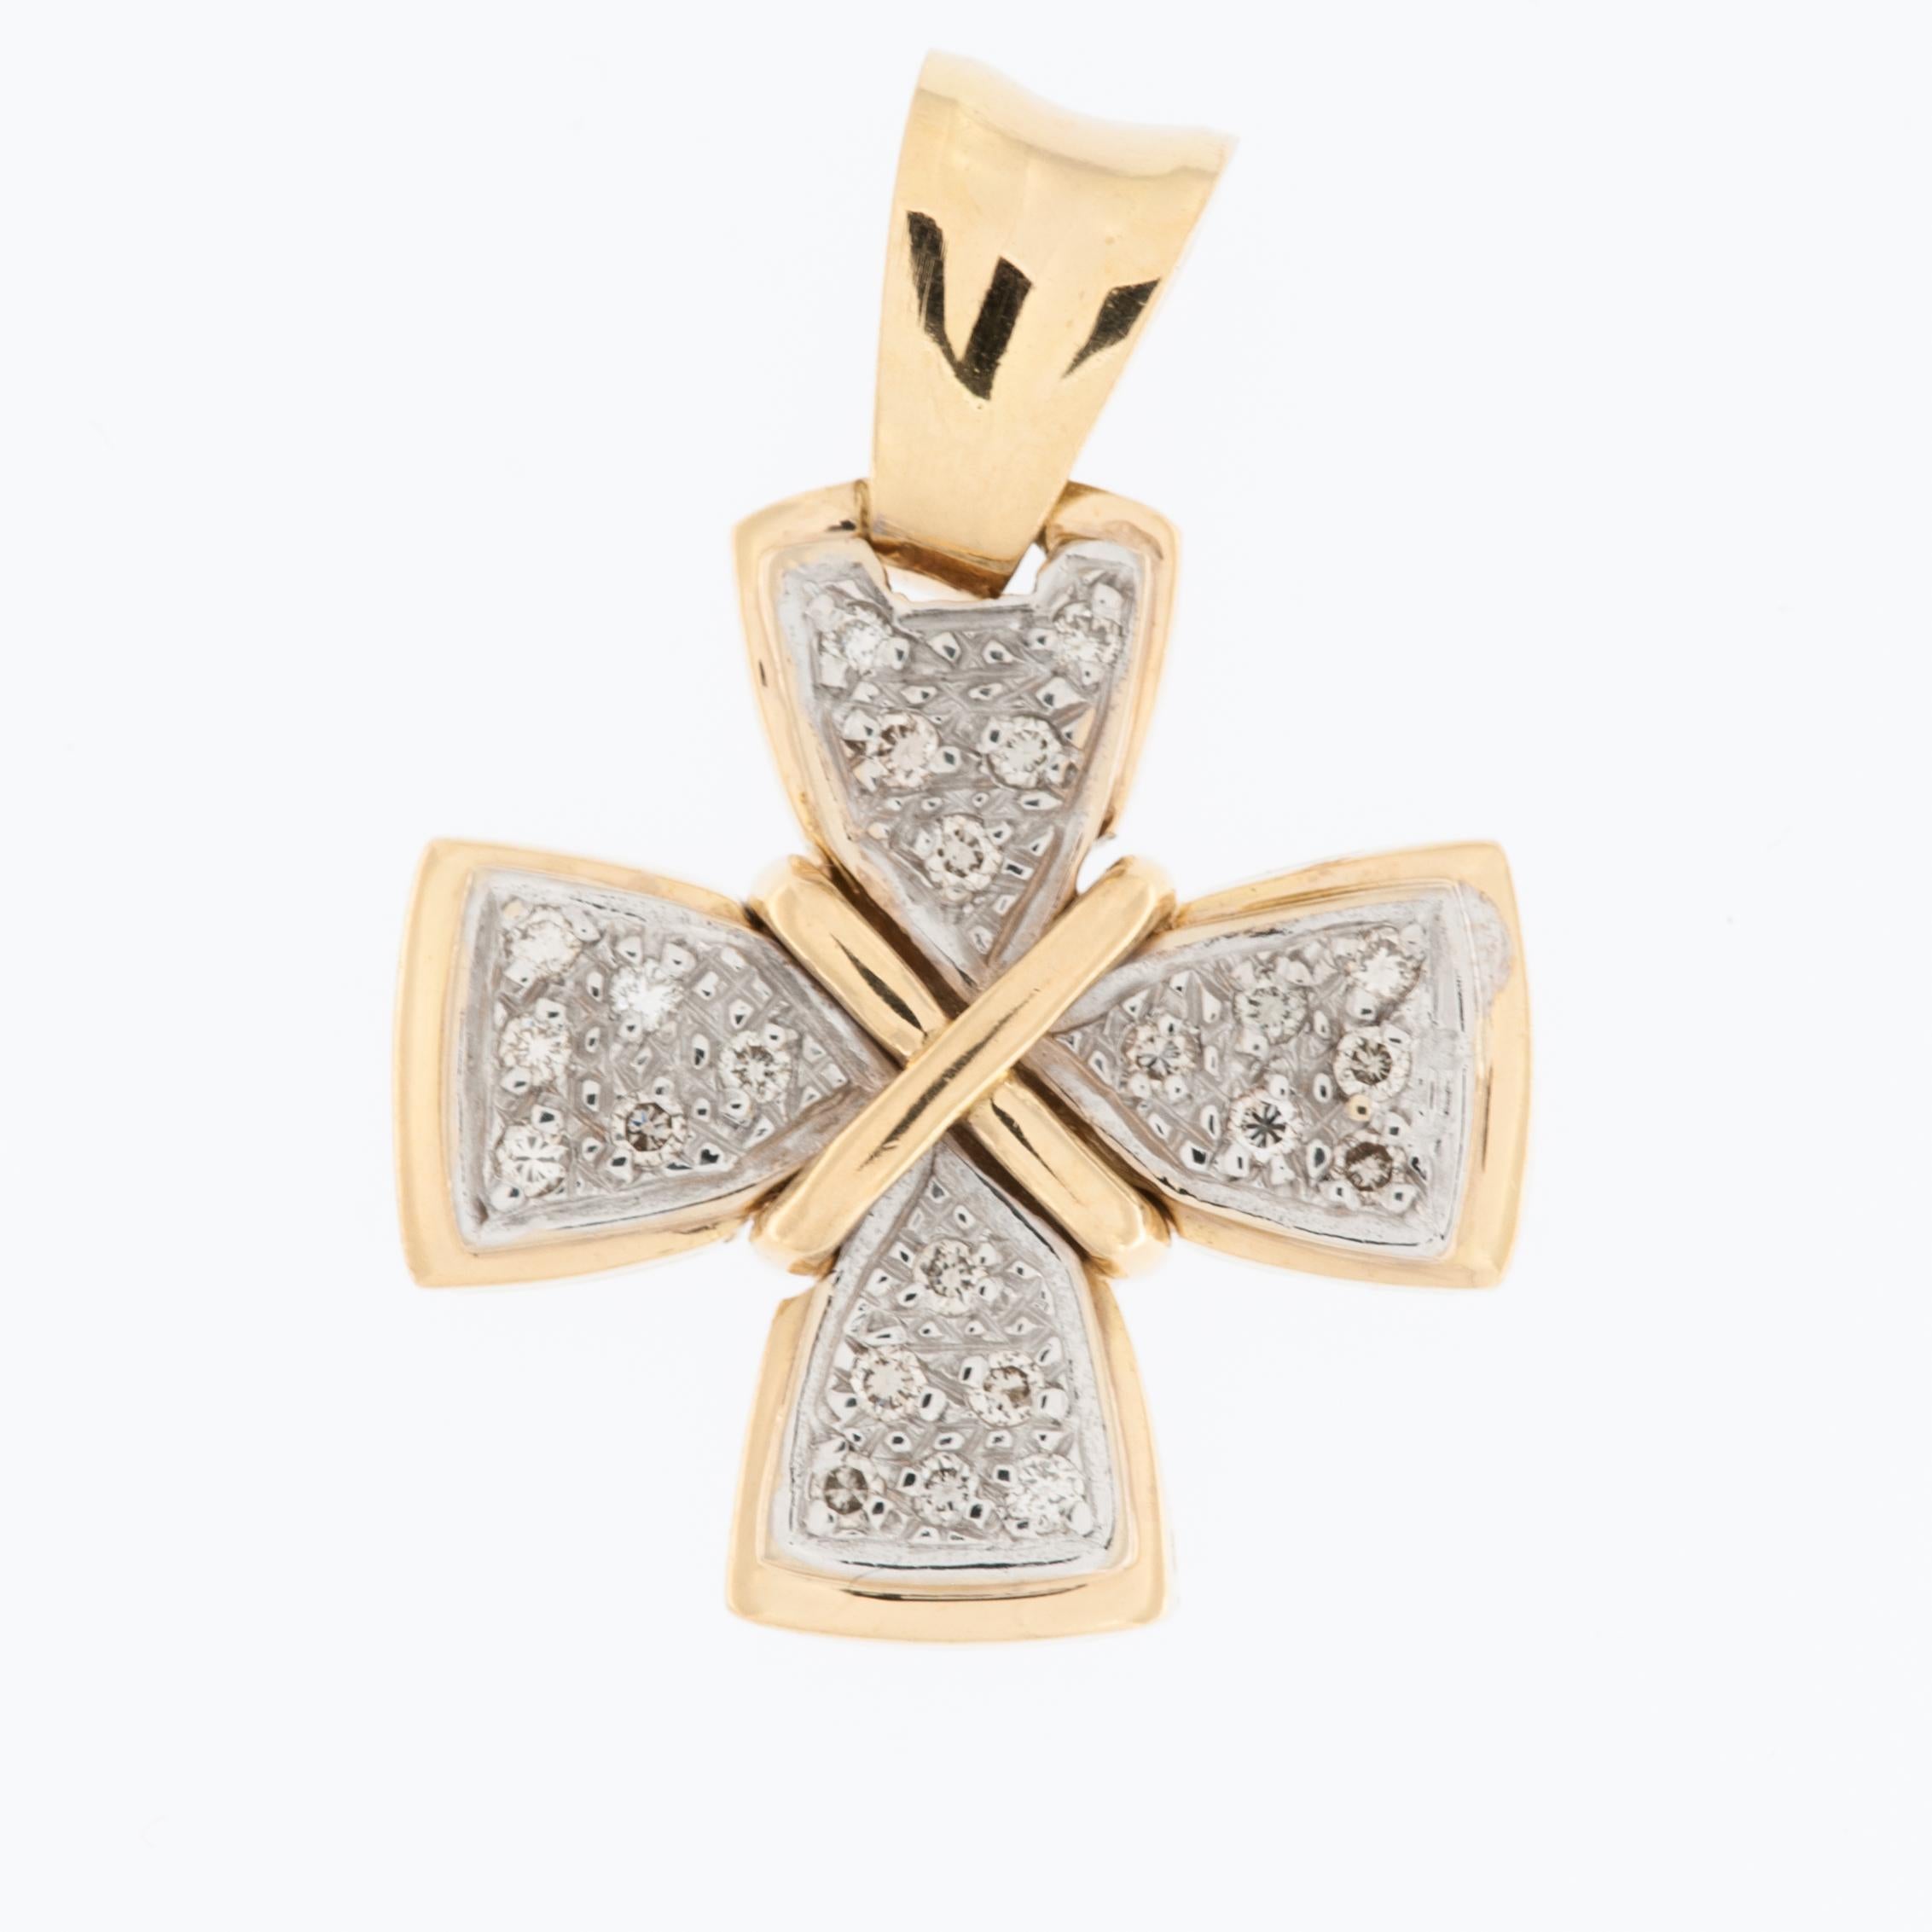 The French 18kt Gold Cross with Diamonds is a beautiful and elegant piece of jewelry that combines the classic symbolism of a cross with luxurious materials and sparkling gemstones. 

This cross is designed in the shape of a Greek cross, which is